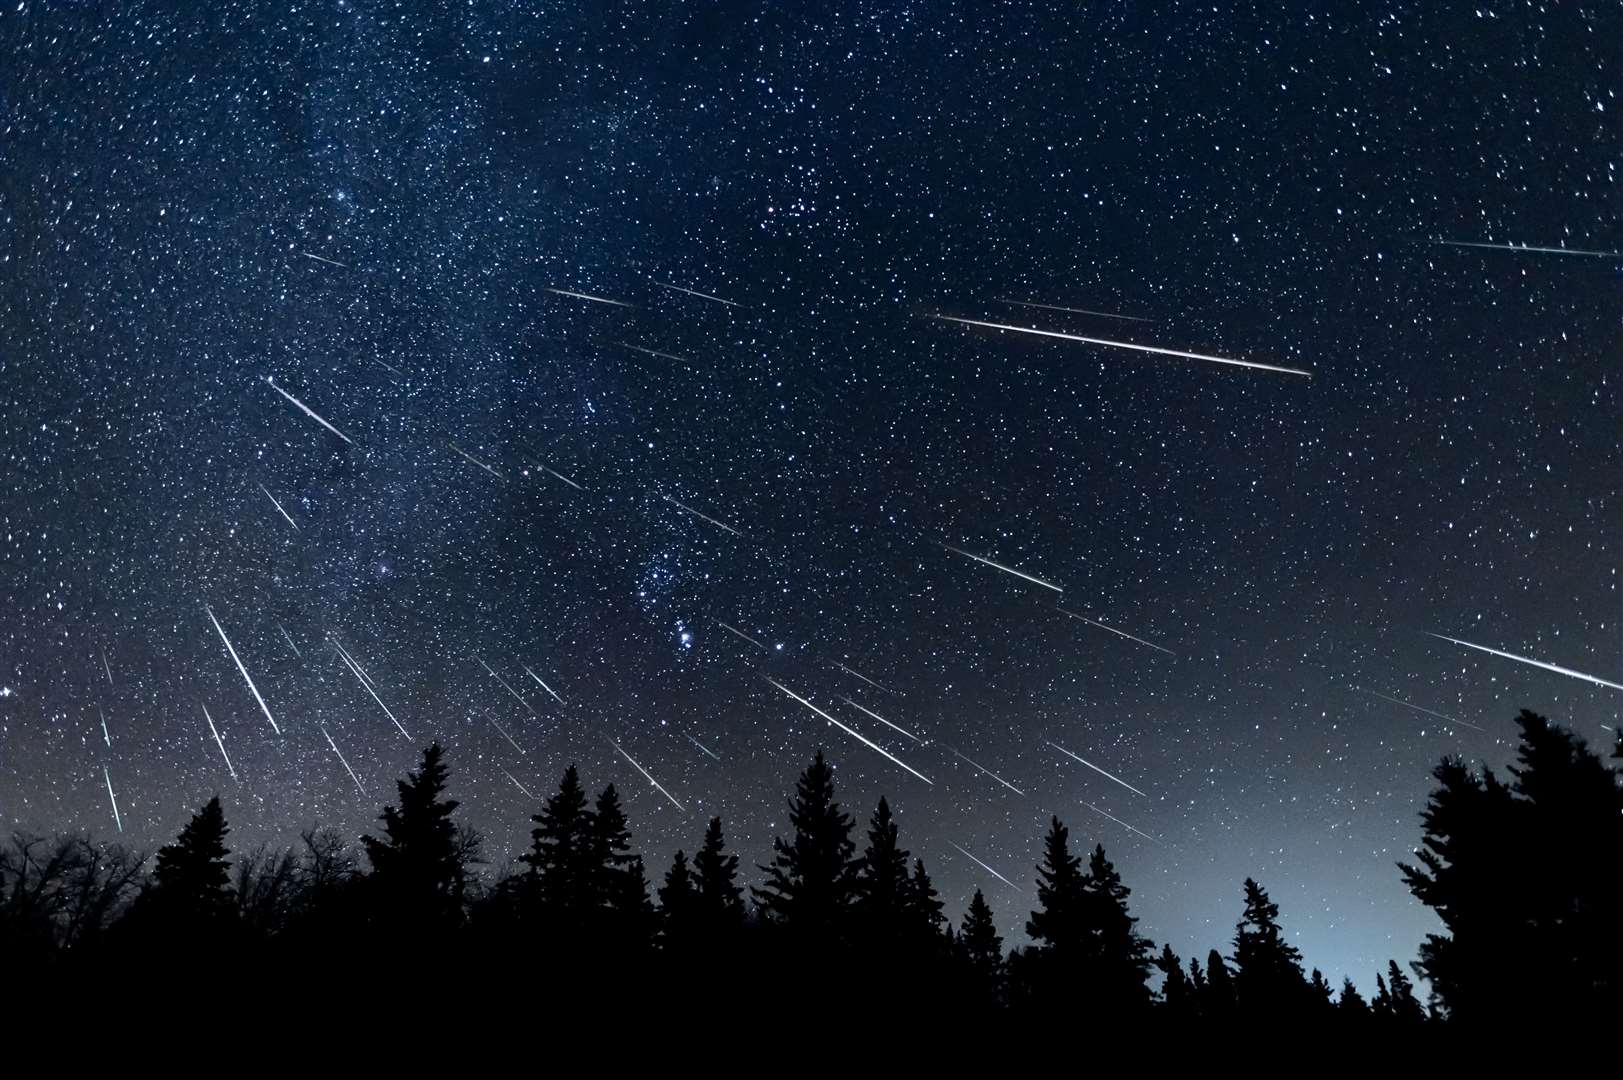 The Germinids meteor shower is expected to peak around December 14 in the early hours Picture: Craig Taylor Photo/stock.adobe.com